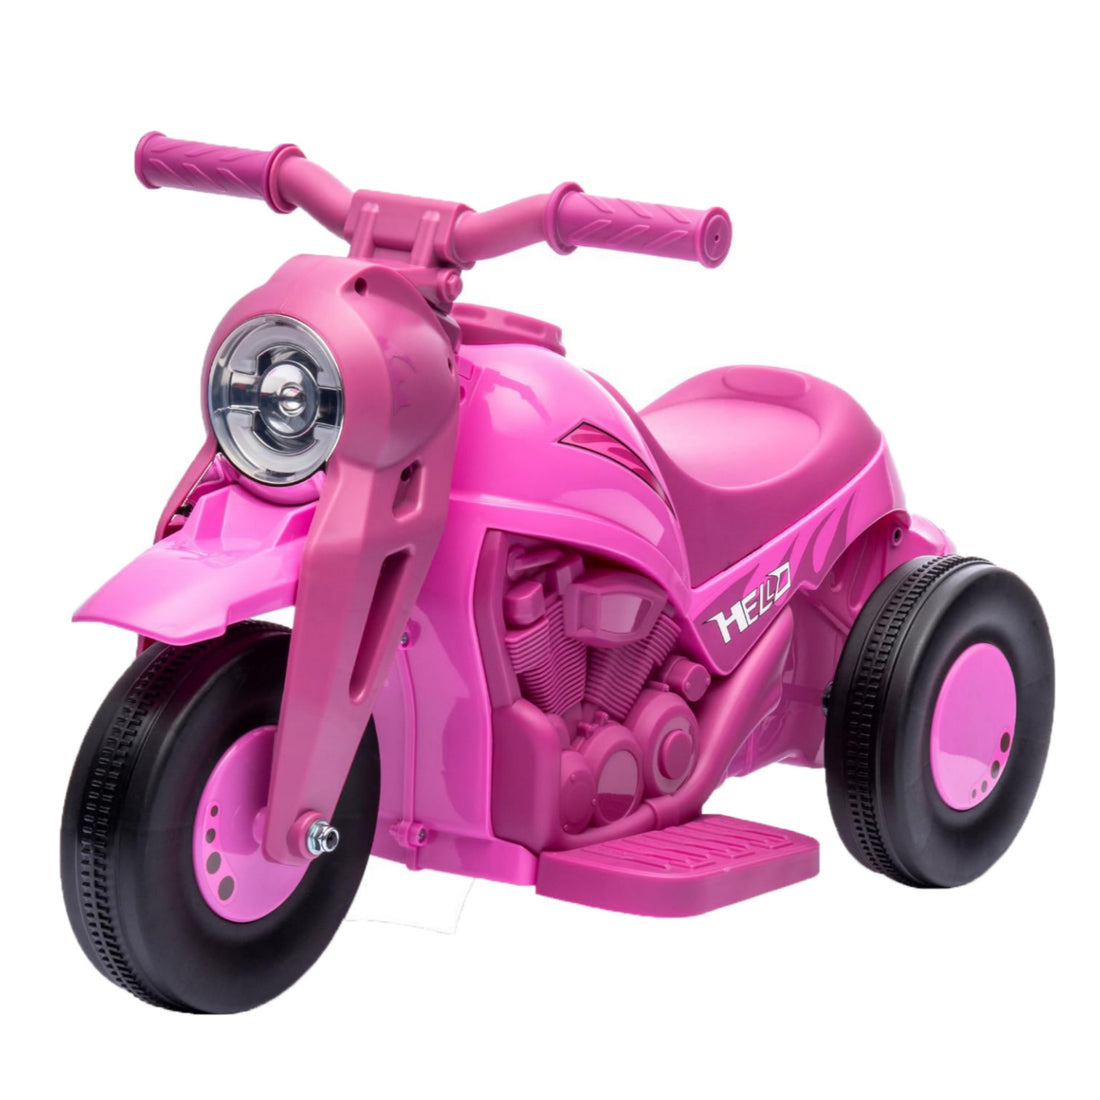 Kids Electric Motorcycle with Bubble Function, 3 Wheels Car for Kids